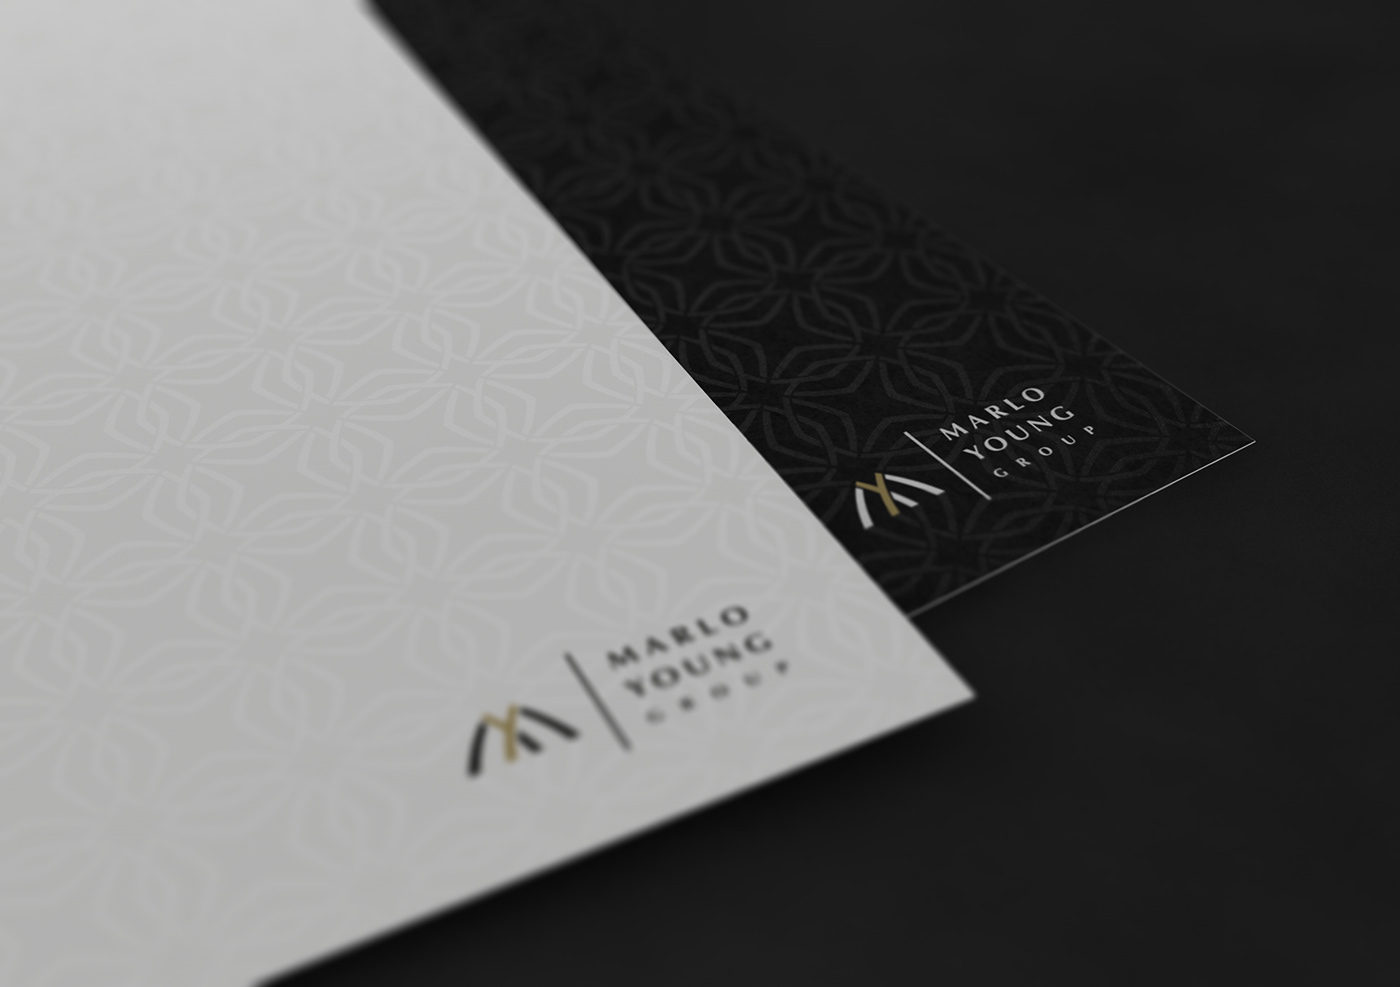 Branding design logo identity stationary Logotype marlo young group print Marcel buerkle south africa corporate